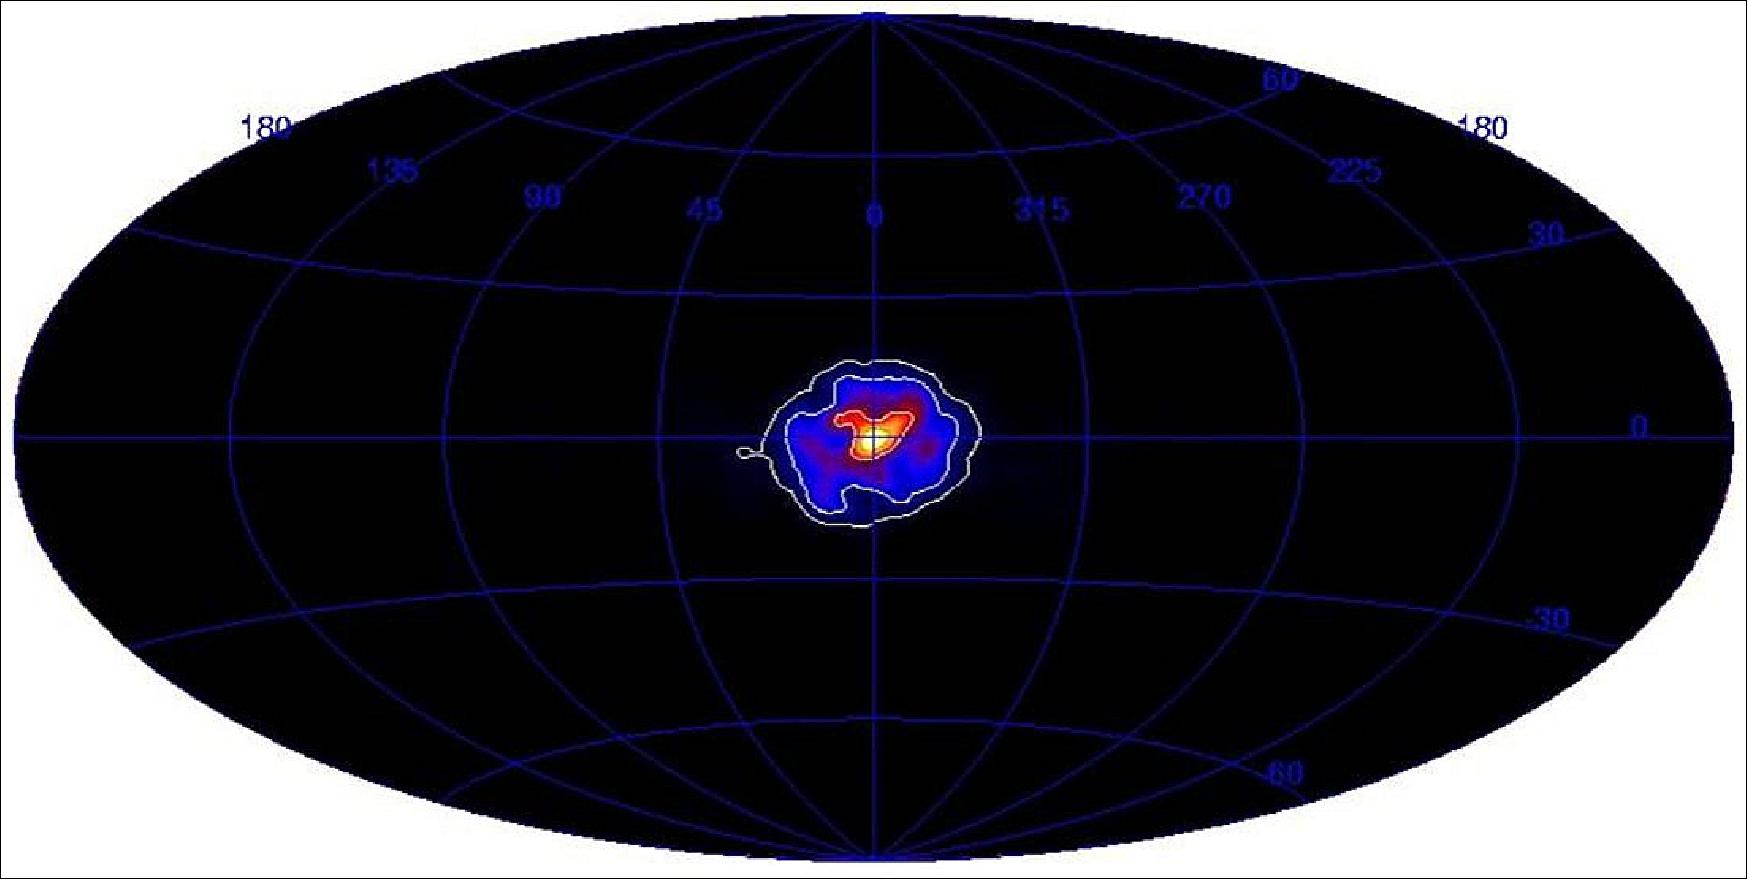 Figure 40: Our Galaxy. The center of the galaxy shines brightly in gamma rays with a specific energy of 511 keV. This is the energy released during an encounter between an electron and its antimatter counterpart, the positron. It is not yet known what creates the antimatter particles. The image shows the full sky at 511 keV (image credit: ESA/ J. Knödlseder et al.)